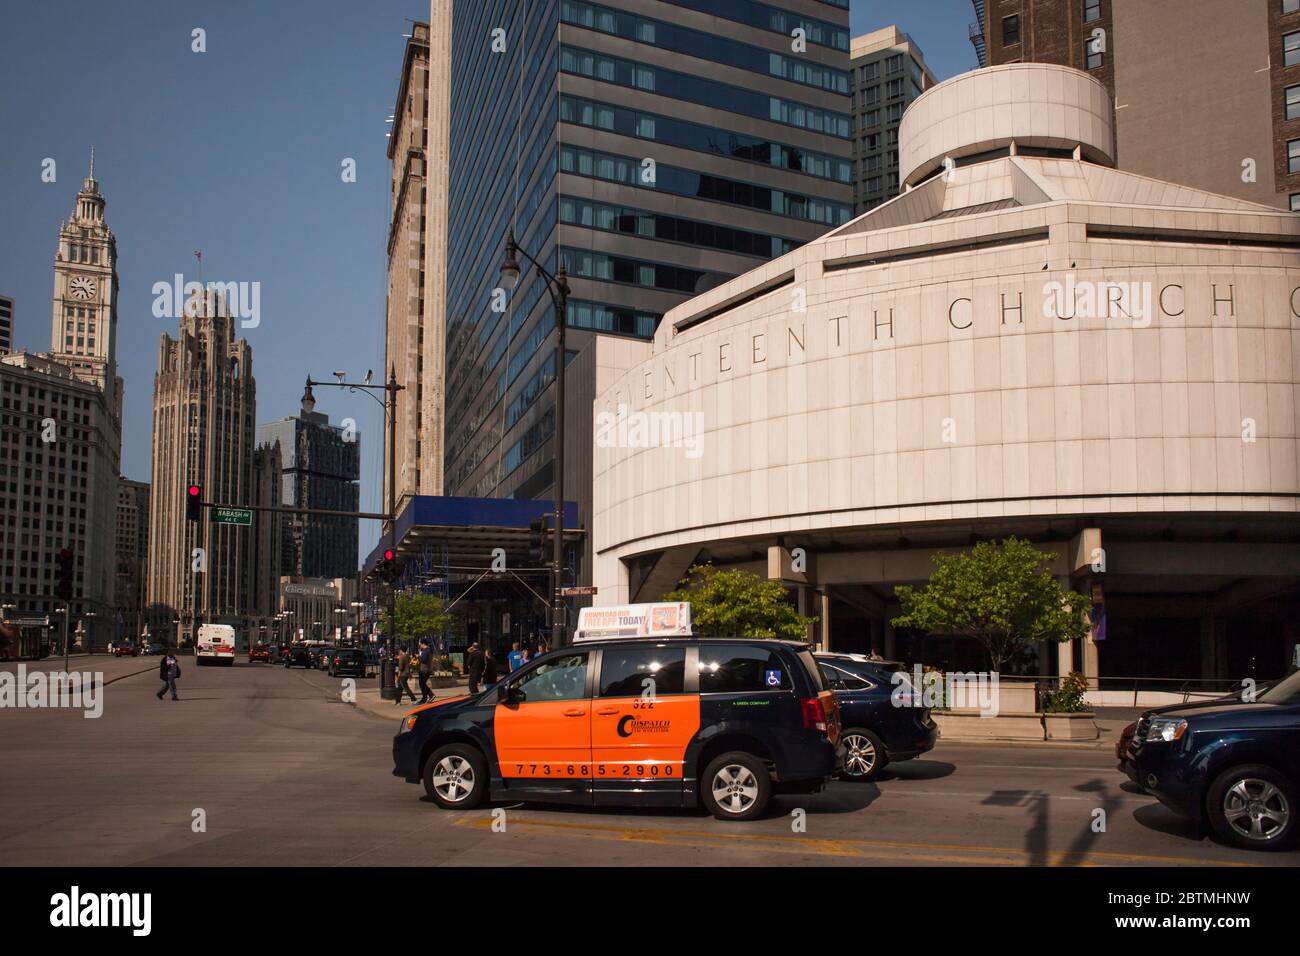 E. Wacker Drive at Wabash Ave with cars, including an orange and black taxi, passing by Seventeenth Church of Christ Scientist, Chicago Loop, Illinois Stock Photo